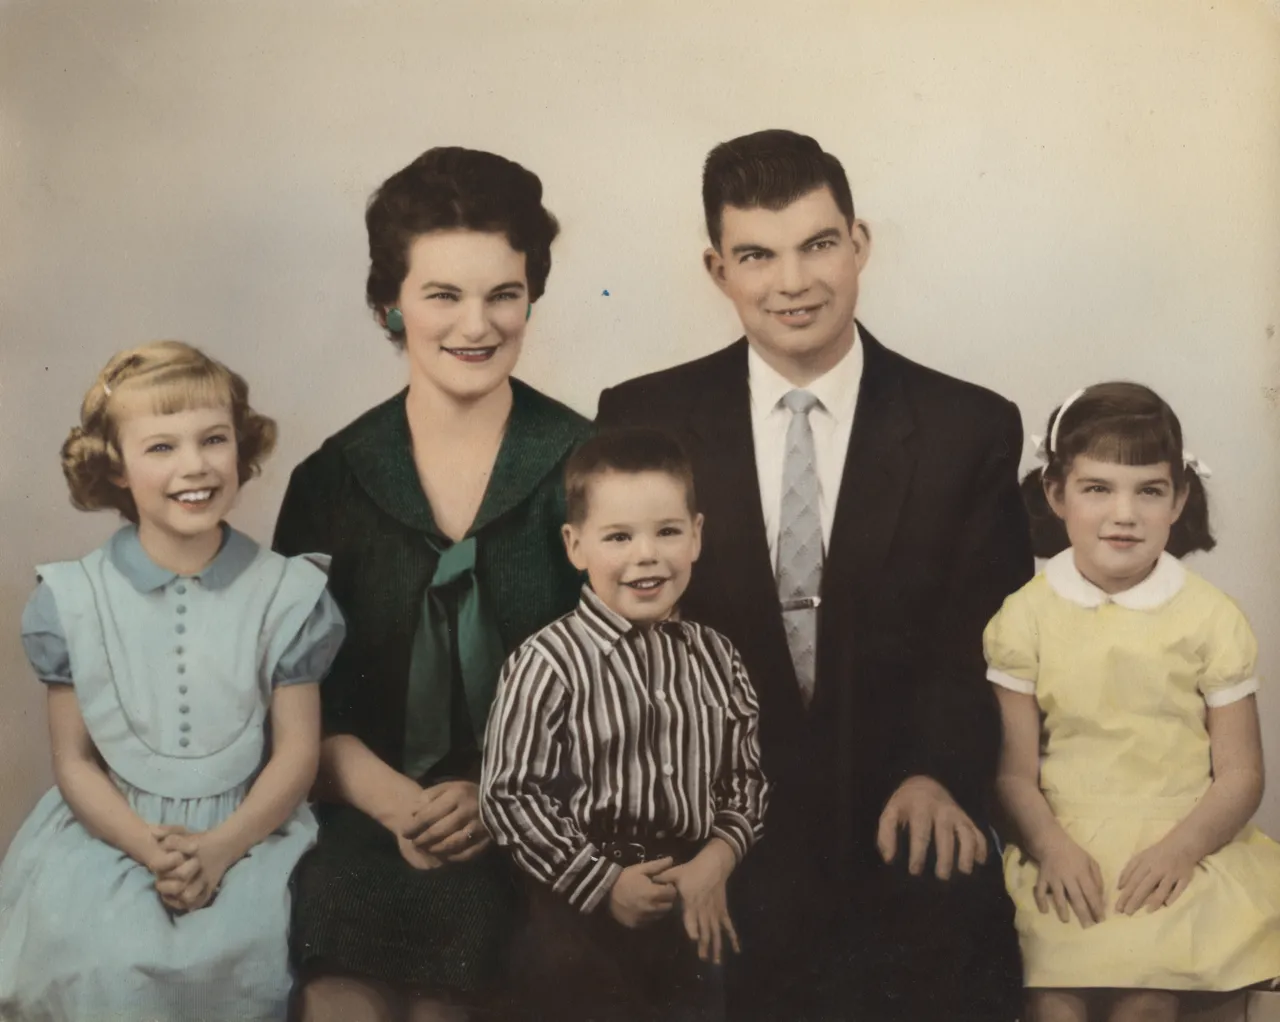 Marilyn Morehead Family Pic 60s Whole Fam Screenshot at 2018-08-14 22:30:34.png